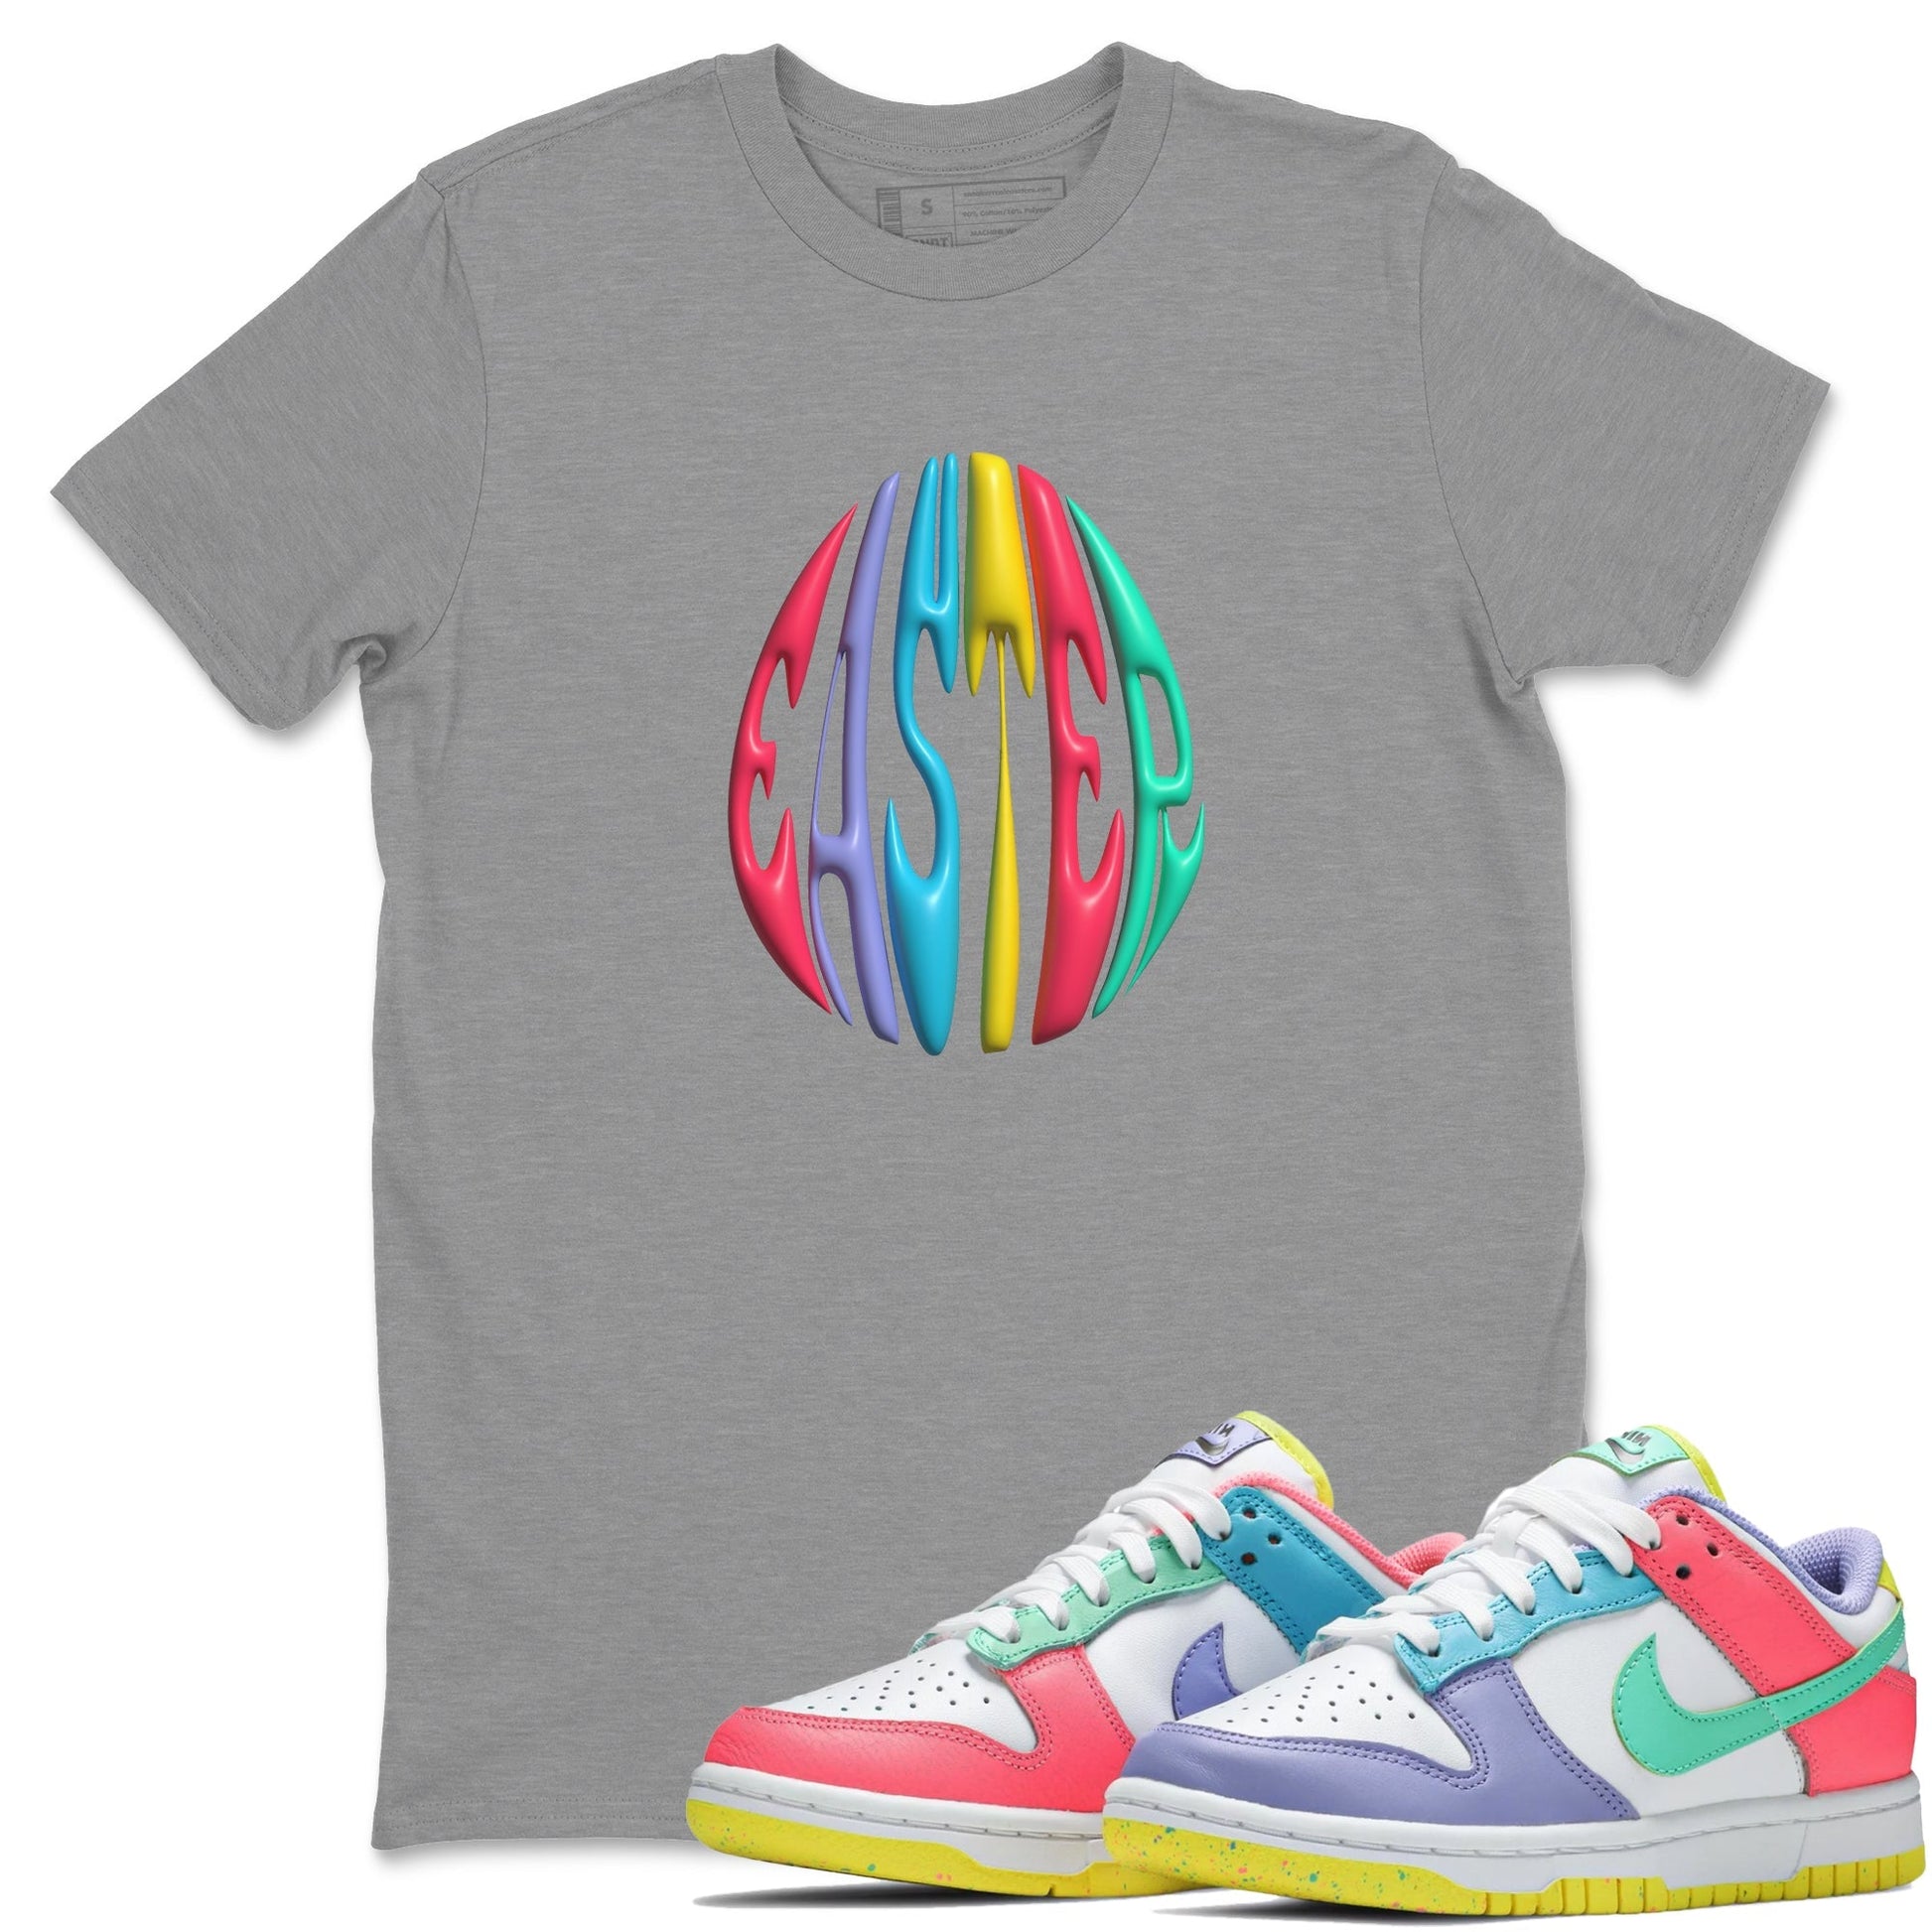 Dunk Easter Candy Sneaker Tees Drip Gear Zone 3D Easter Typo Sneaker Tees Nike Easter Shirt Unisex Shirts Heather Grey 1